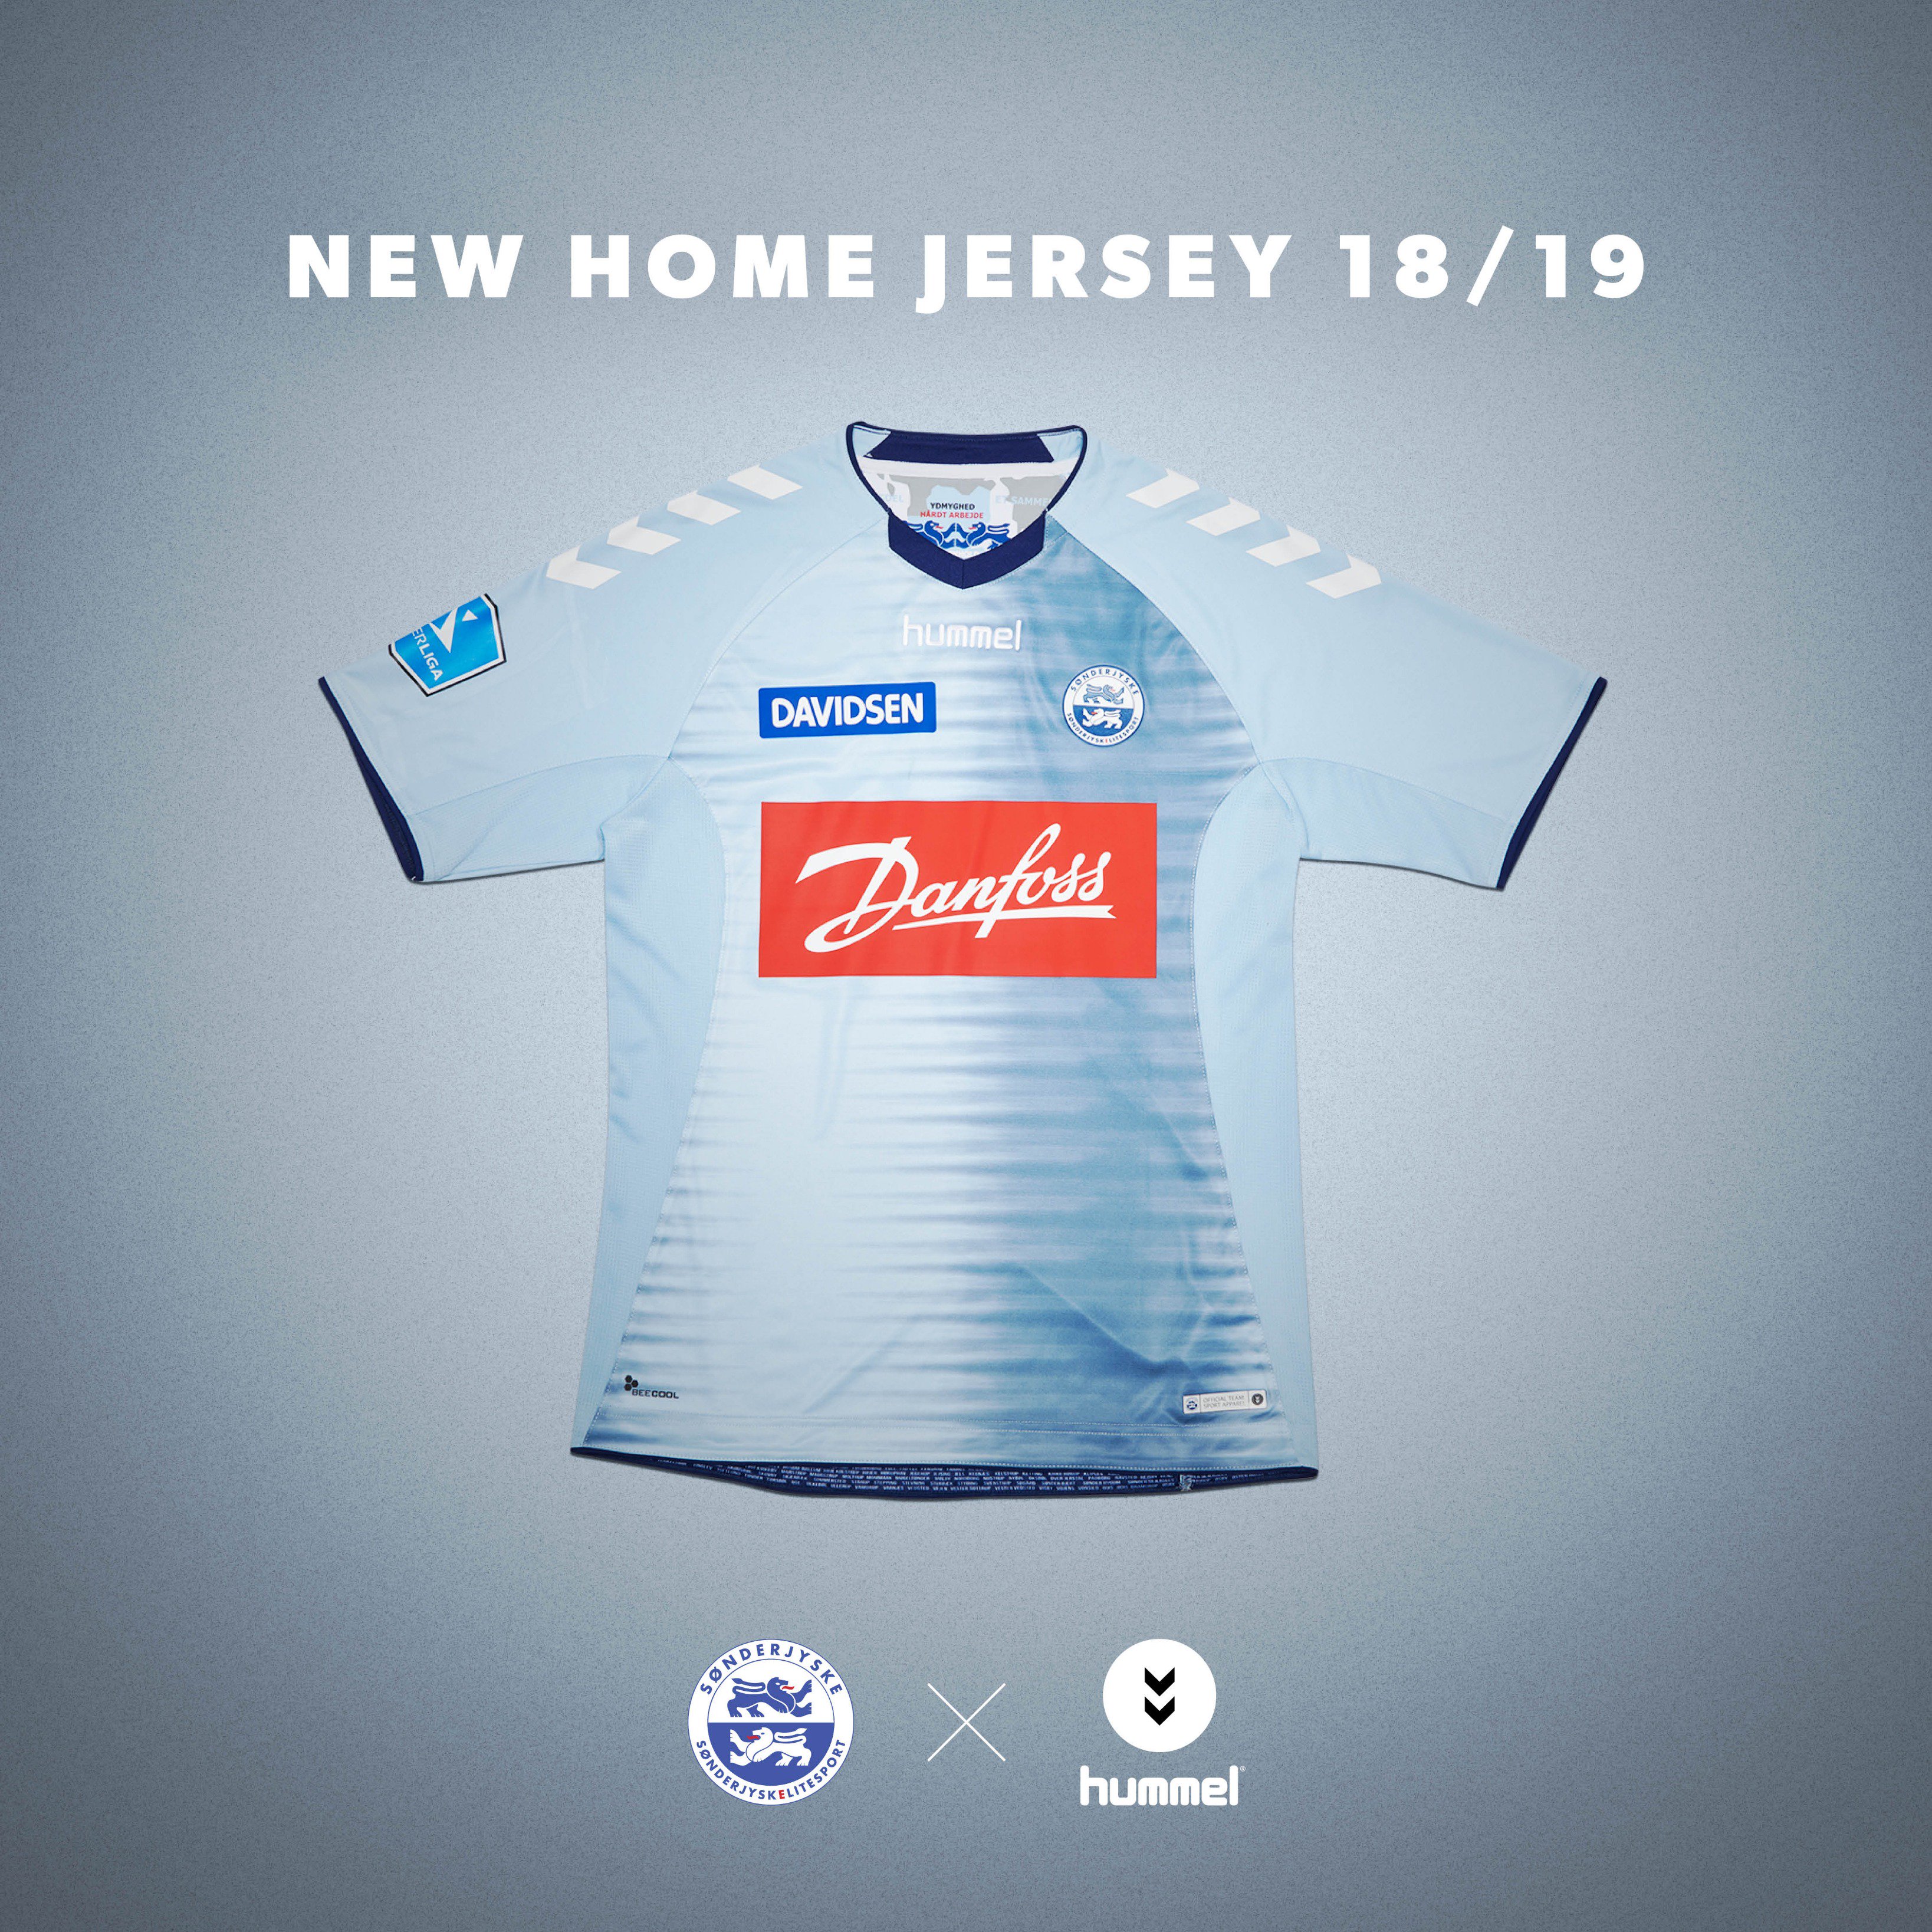 Vise dig pistol Statistisk hummel ar Twitter: "NEW SØNDERJYSKE HOME 18/19! The new home jersey of  Sønderjyske is a tribute to the Southern region of Denmark. Five of the  most famous attractions of the region appears